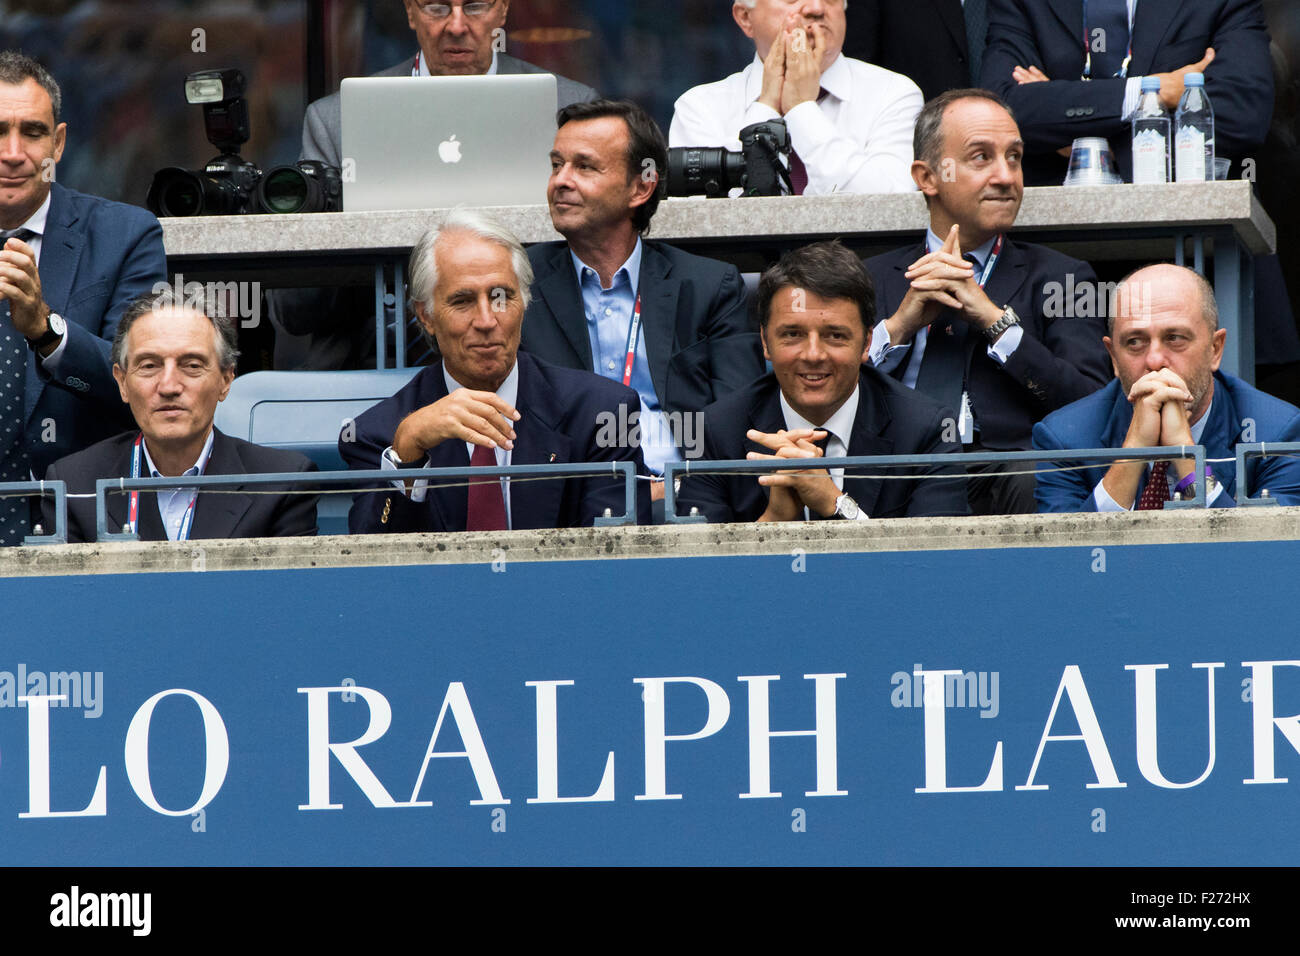 Italian prime minister Matteo Renzi (third from left) watches Flavvia Pennetta (ITA) and Roberta Vinci (ITA) in the Women's Final at the  2015 US Open Tennis Stock Photo